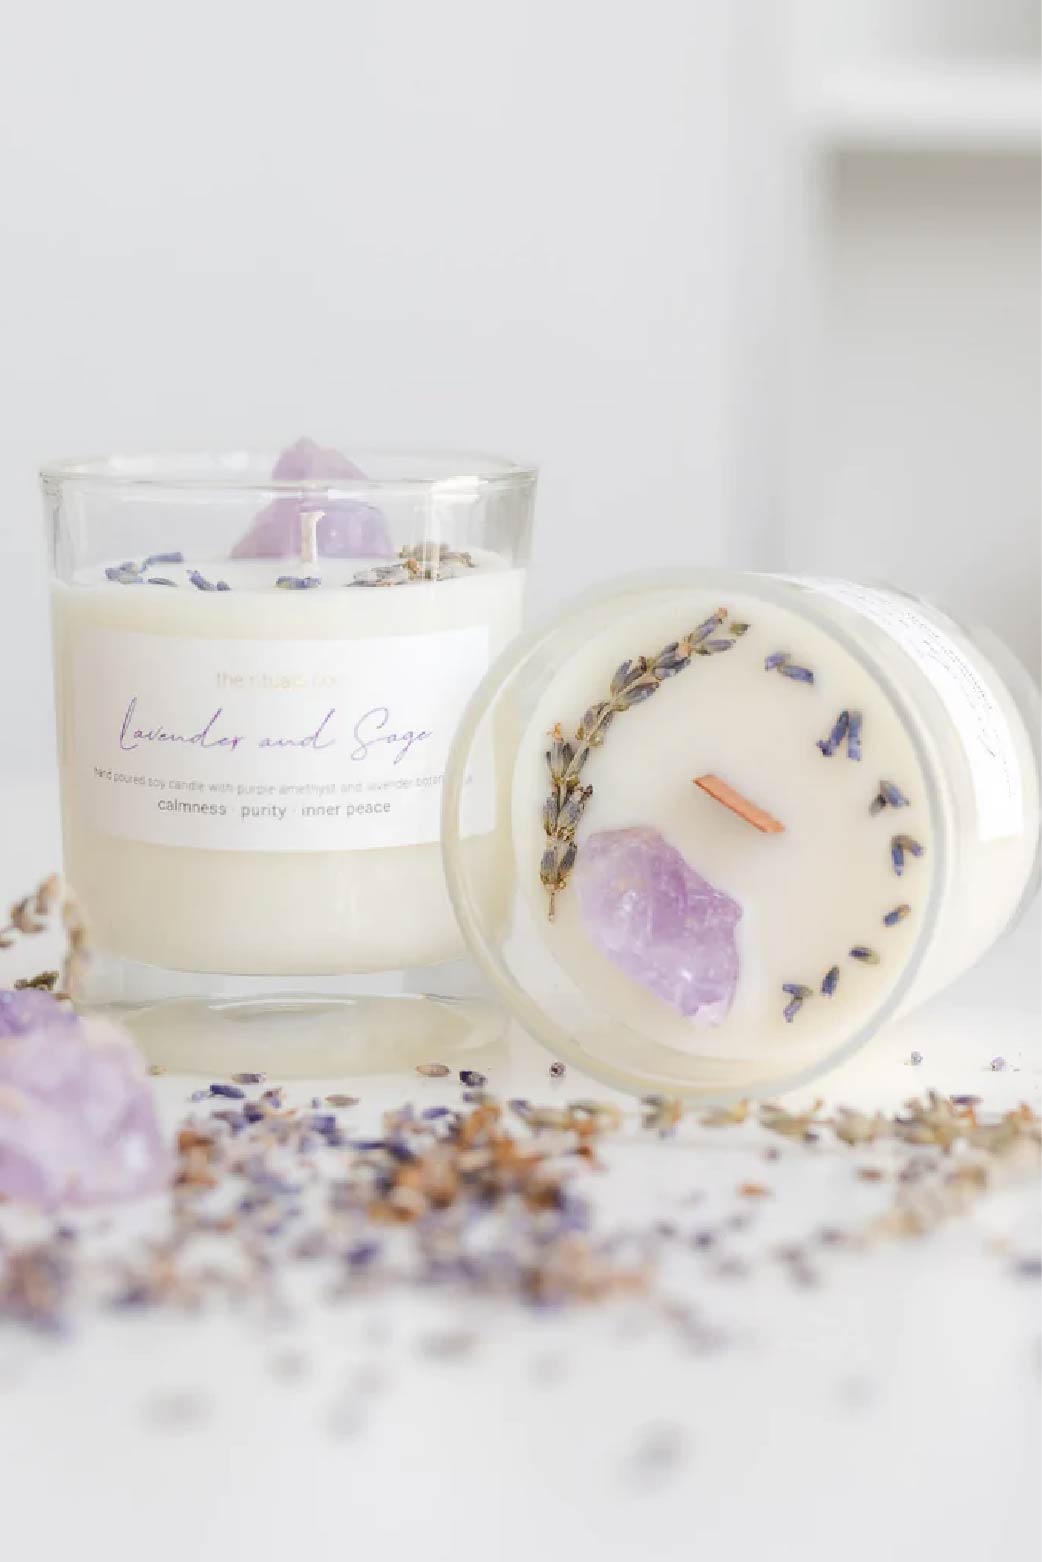 Rituals Co Candle (Lavender and Sage)